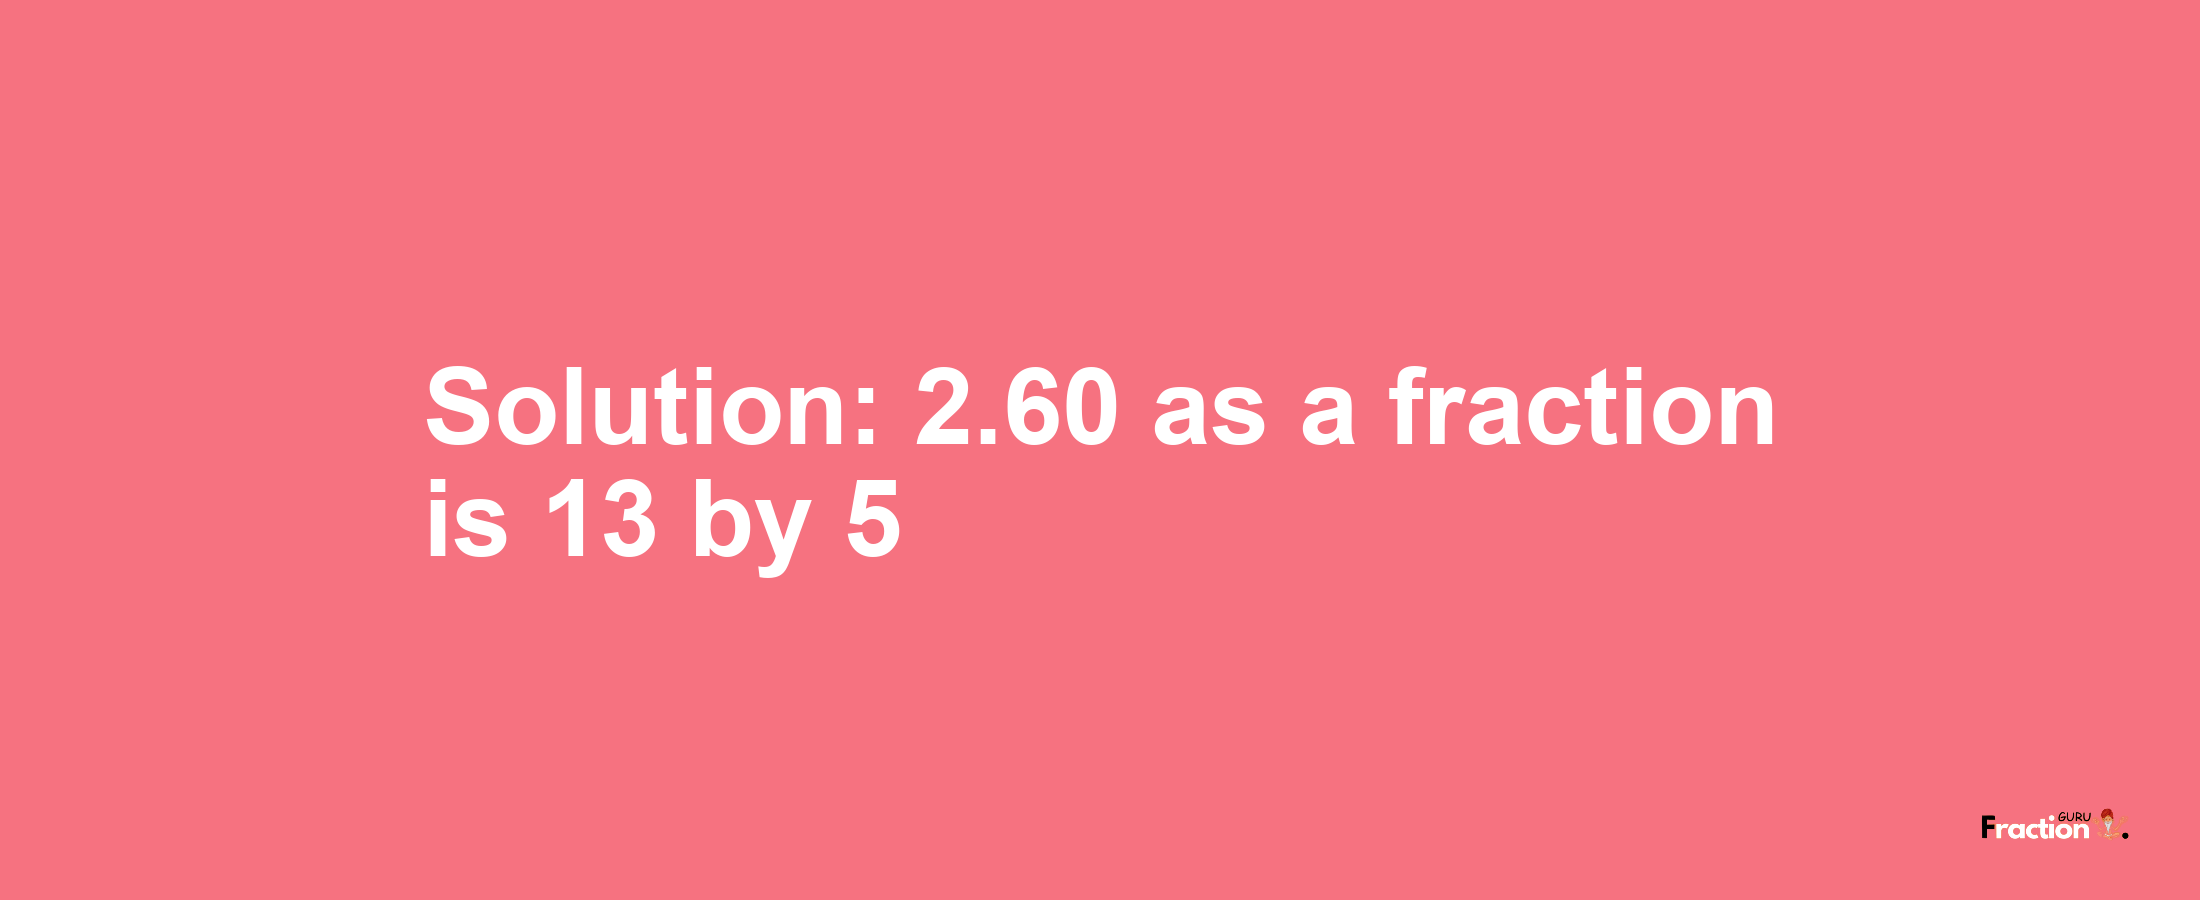 Solution:2.60 as a fraction is 13/5